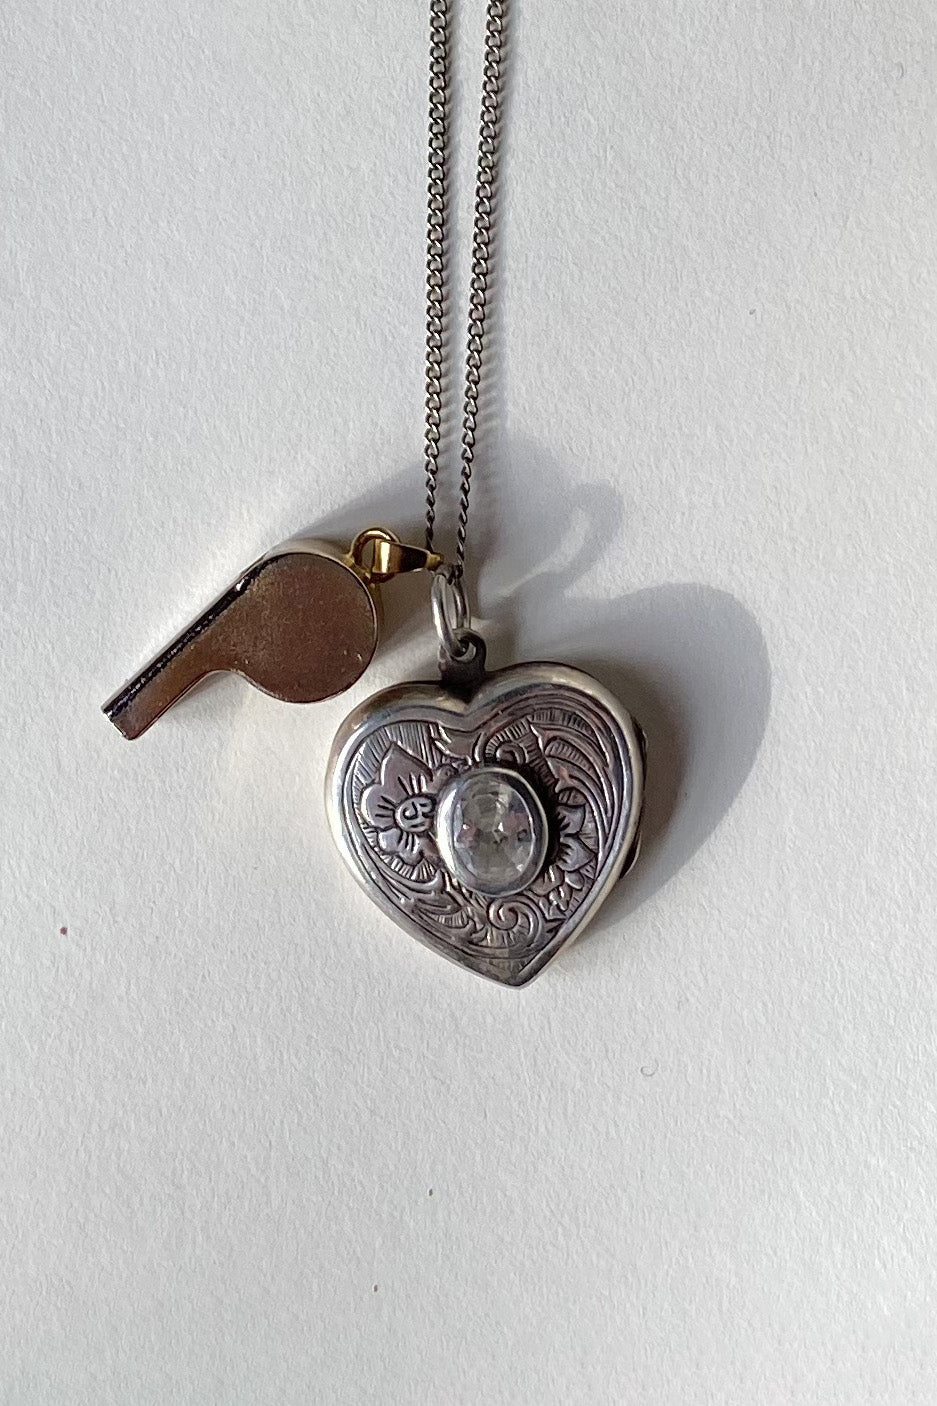 Novelty Whistle and Sterling Heart Pendant Necklace